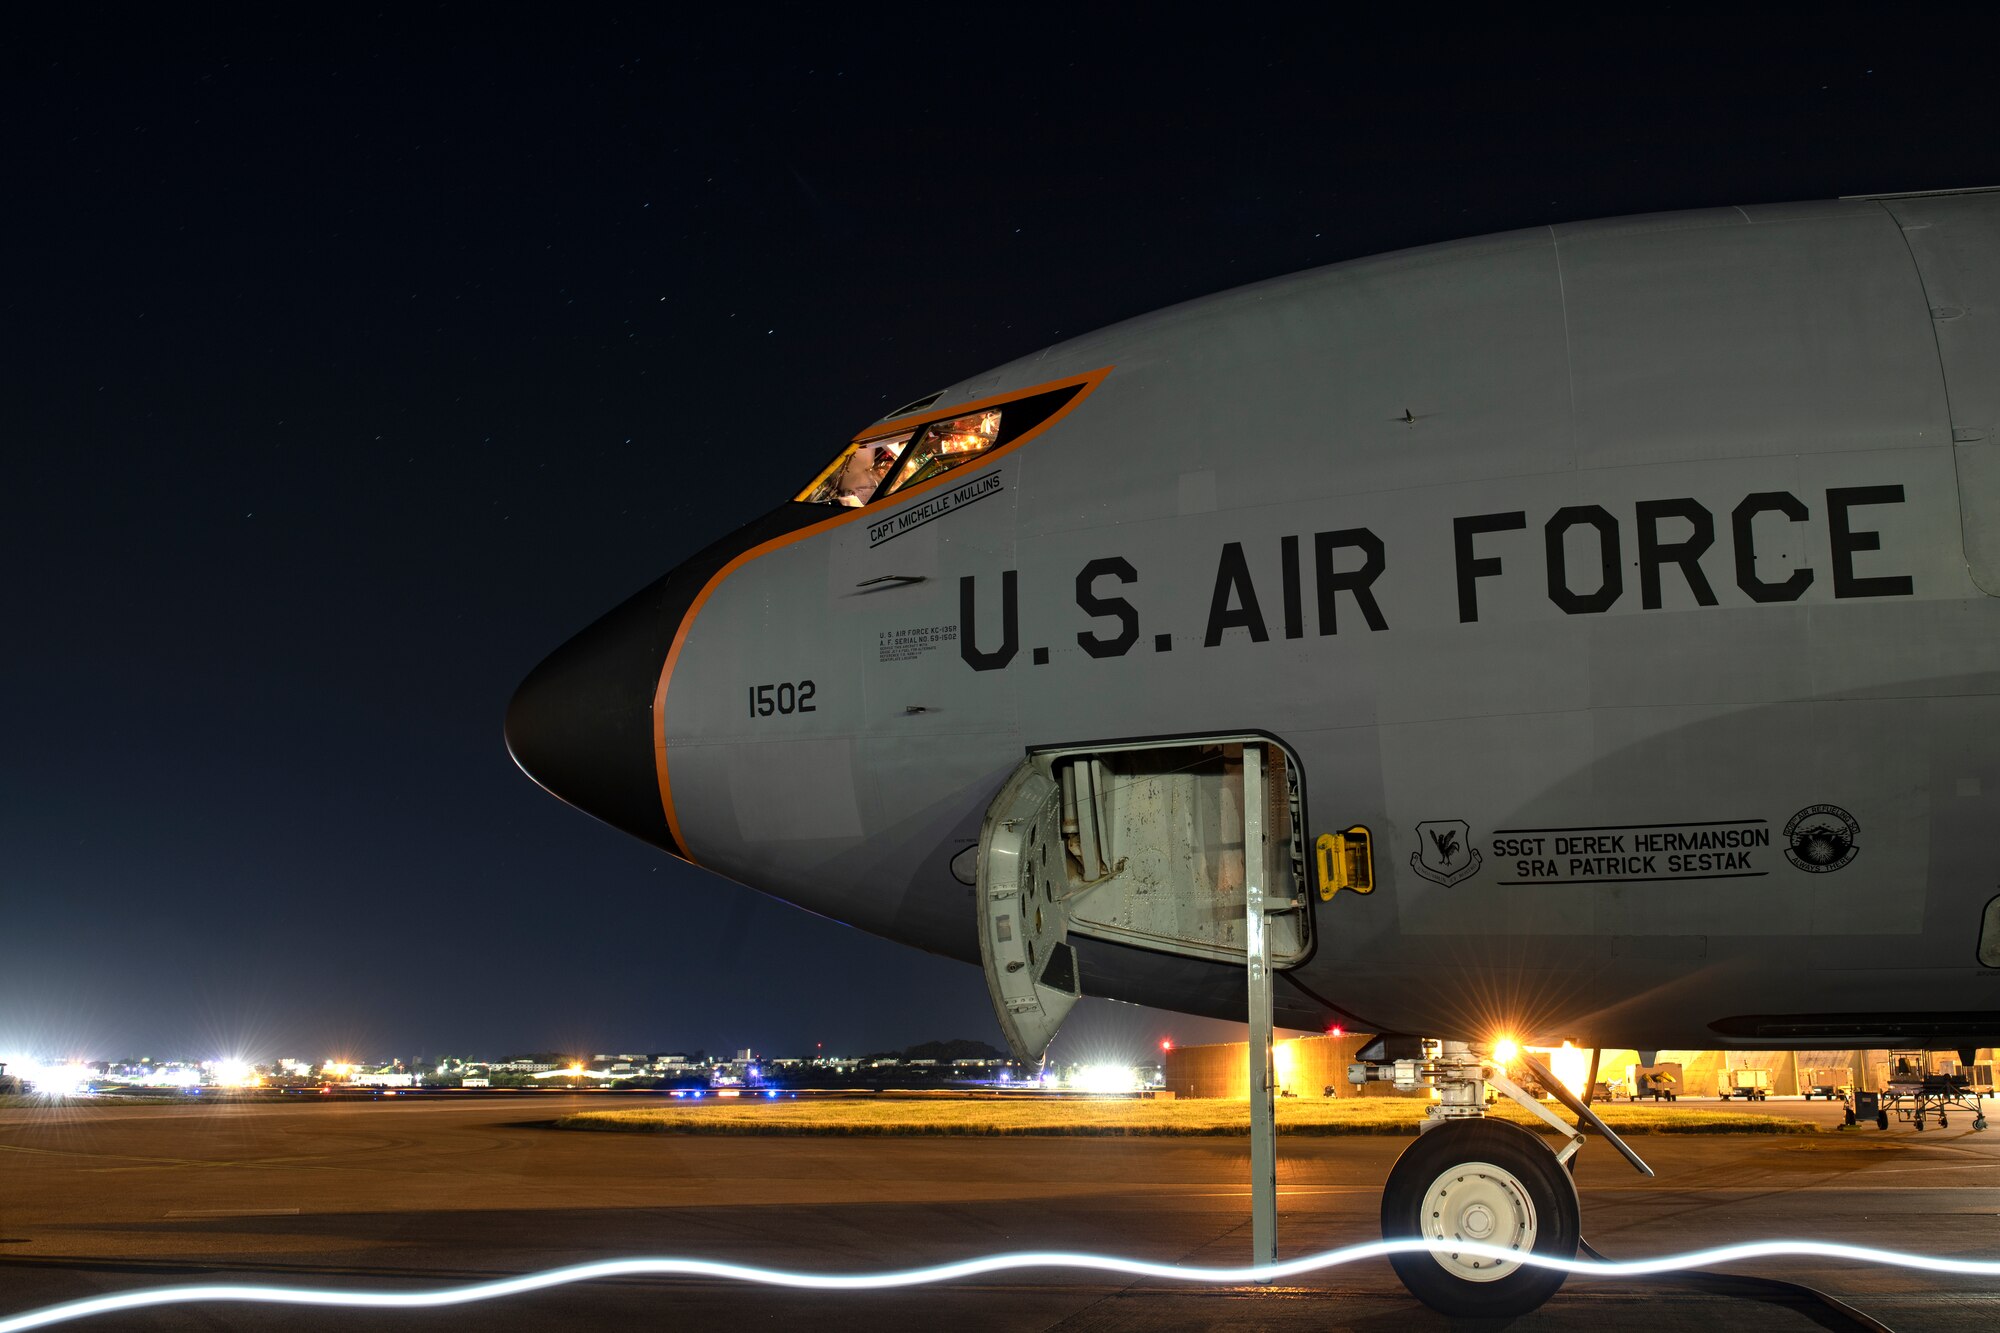 A KC-135 Stratotanker assigned to the 909th Air Refueling Squadron sits on the flightline prior to an early morning refueling flight at Kadena Air Base, Japan, Oct. 27, 2022. The KC-135 Stratotanker provides the core aerial refueling capability for the Department of Defense, supporting the U.S. Navy, U.S. Marine Corps, and Allied nation aircraft. (U.S. Air Force photo by Senior Airman Jessi Roth)